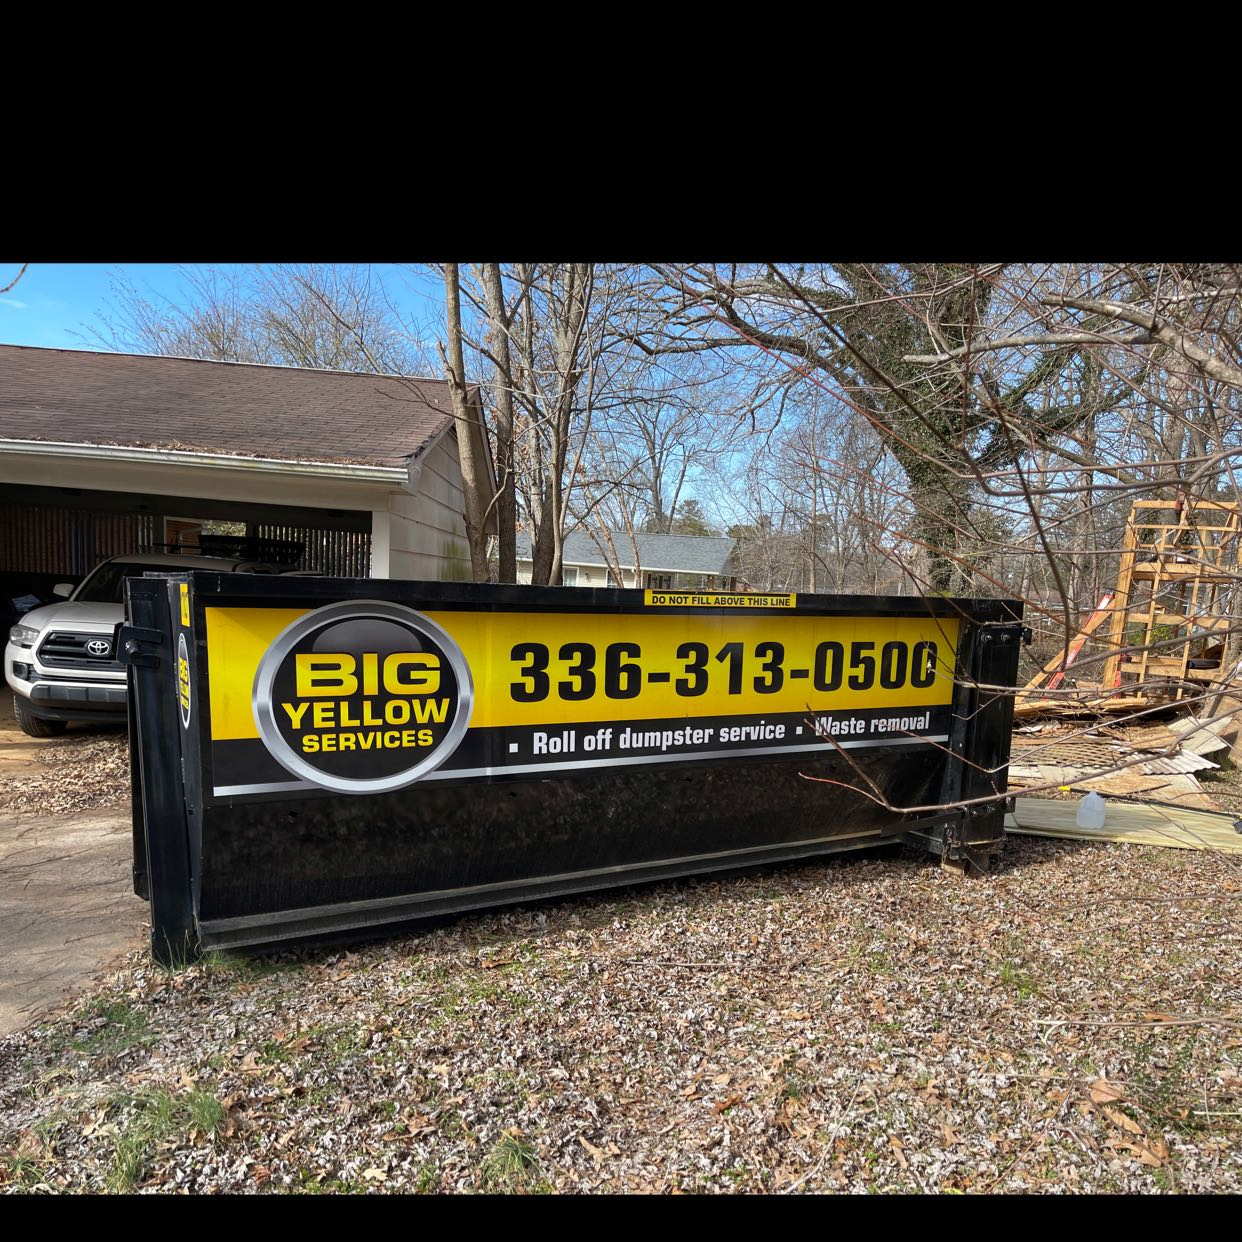 Glen Oaks Road Burlington, NC 27217 Privacy Policy | Roll-Off Dumpster and Portable Toilet Rentals | Big Yellow Services, LLC